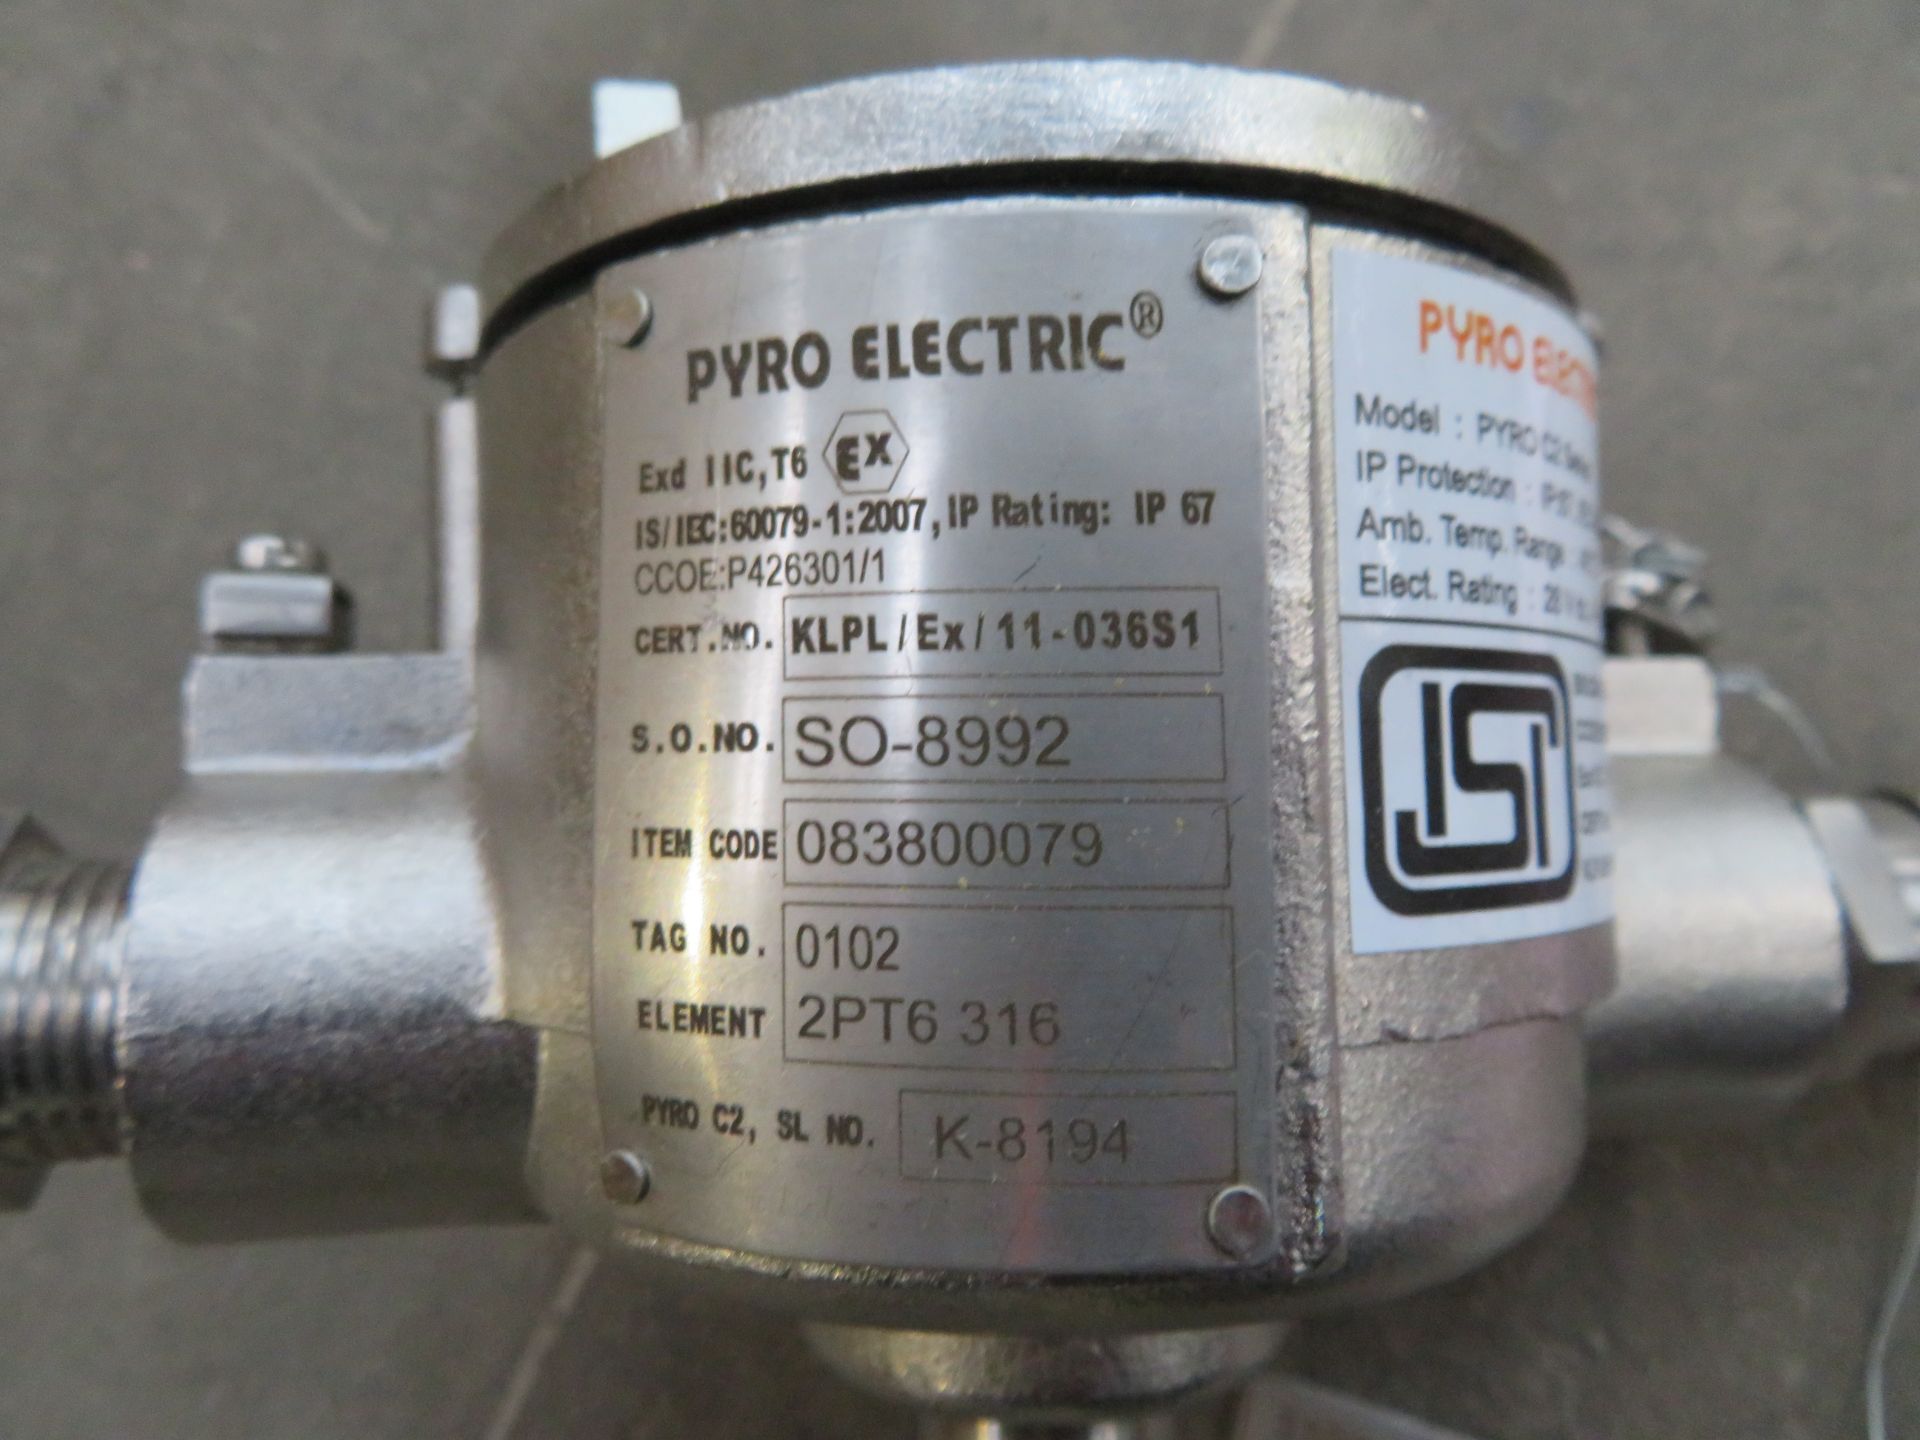 5 x Pyro Electric Pyro C2 Series Temperature Transmitters - Image 2 of 3